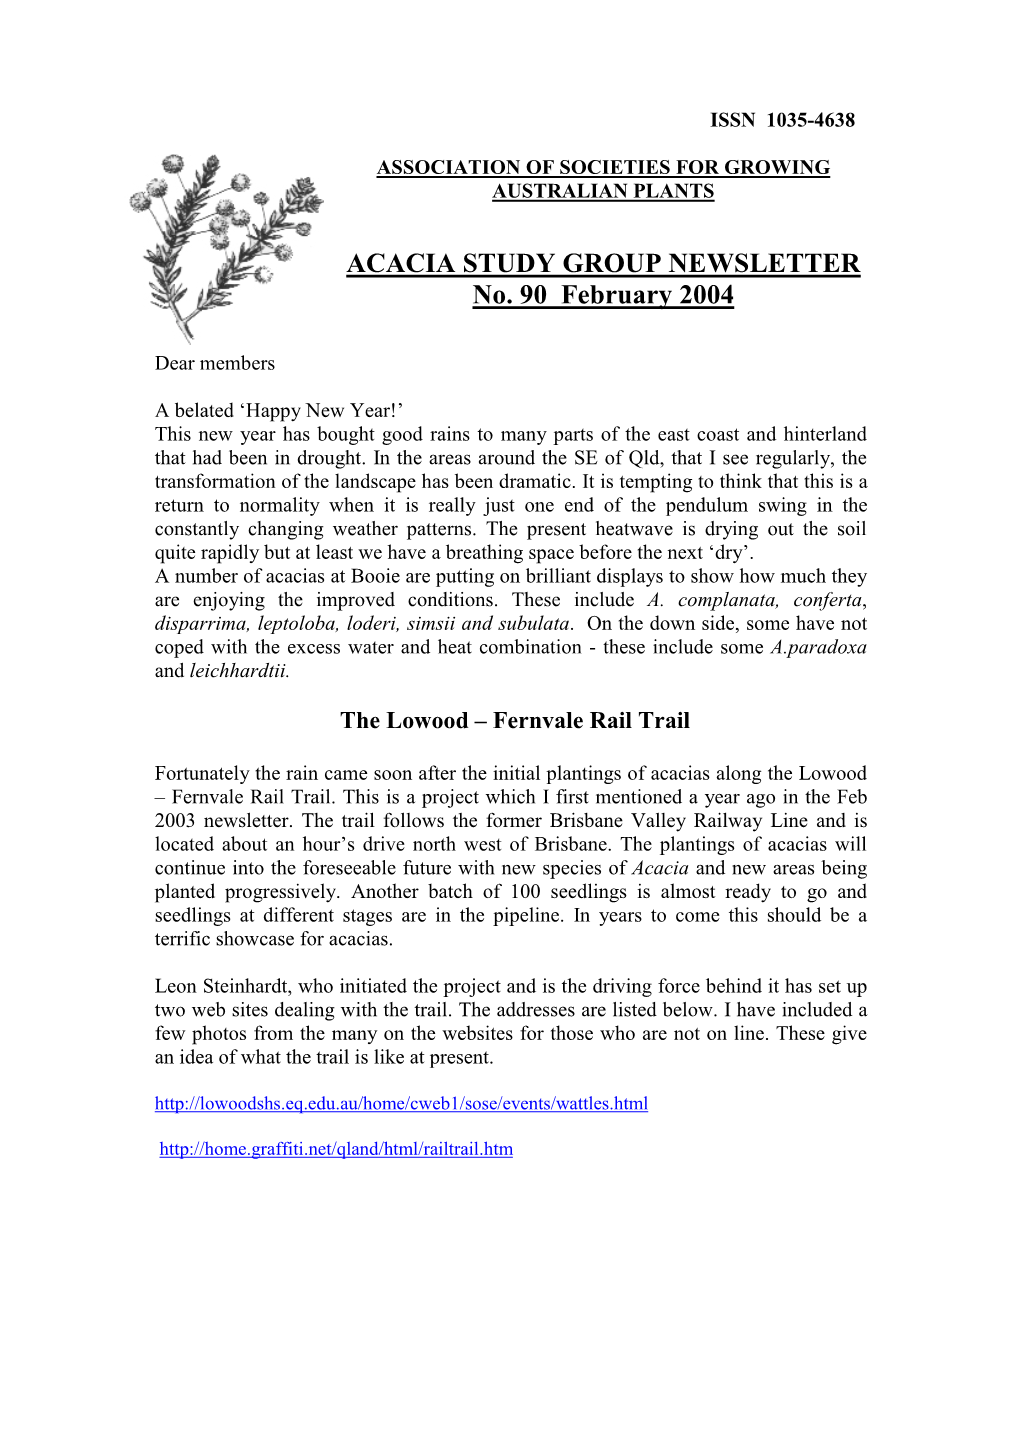 ACACIA STUDY GROUP NEWSLETTER No. 90 February 2004